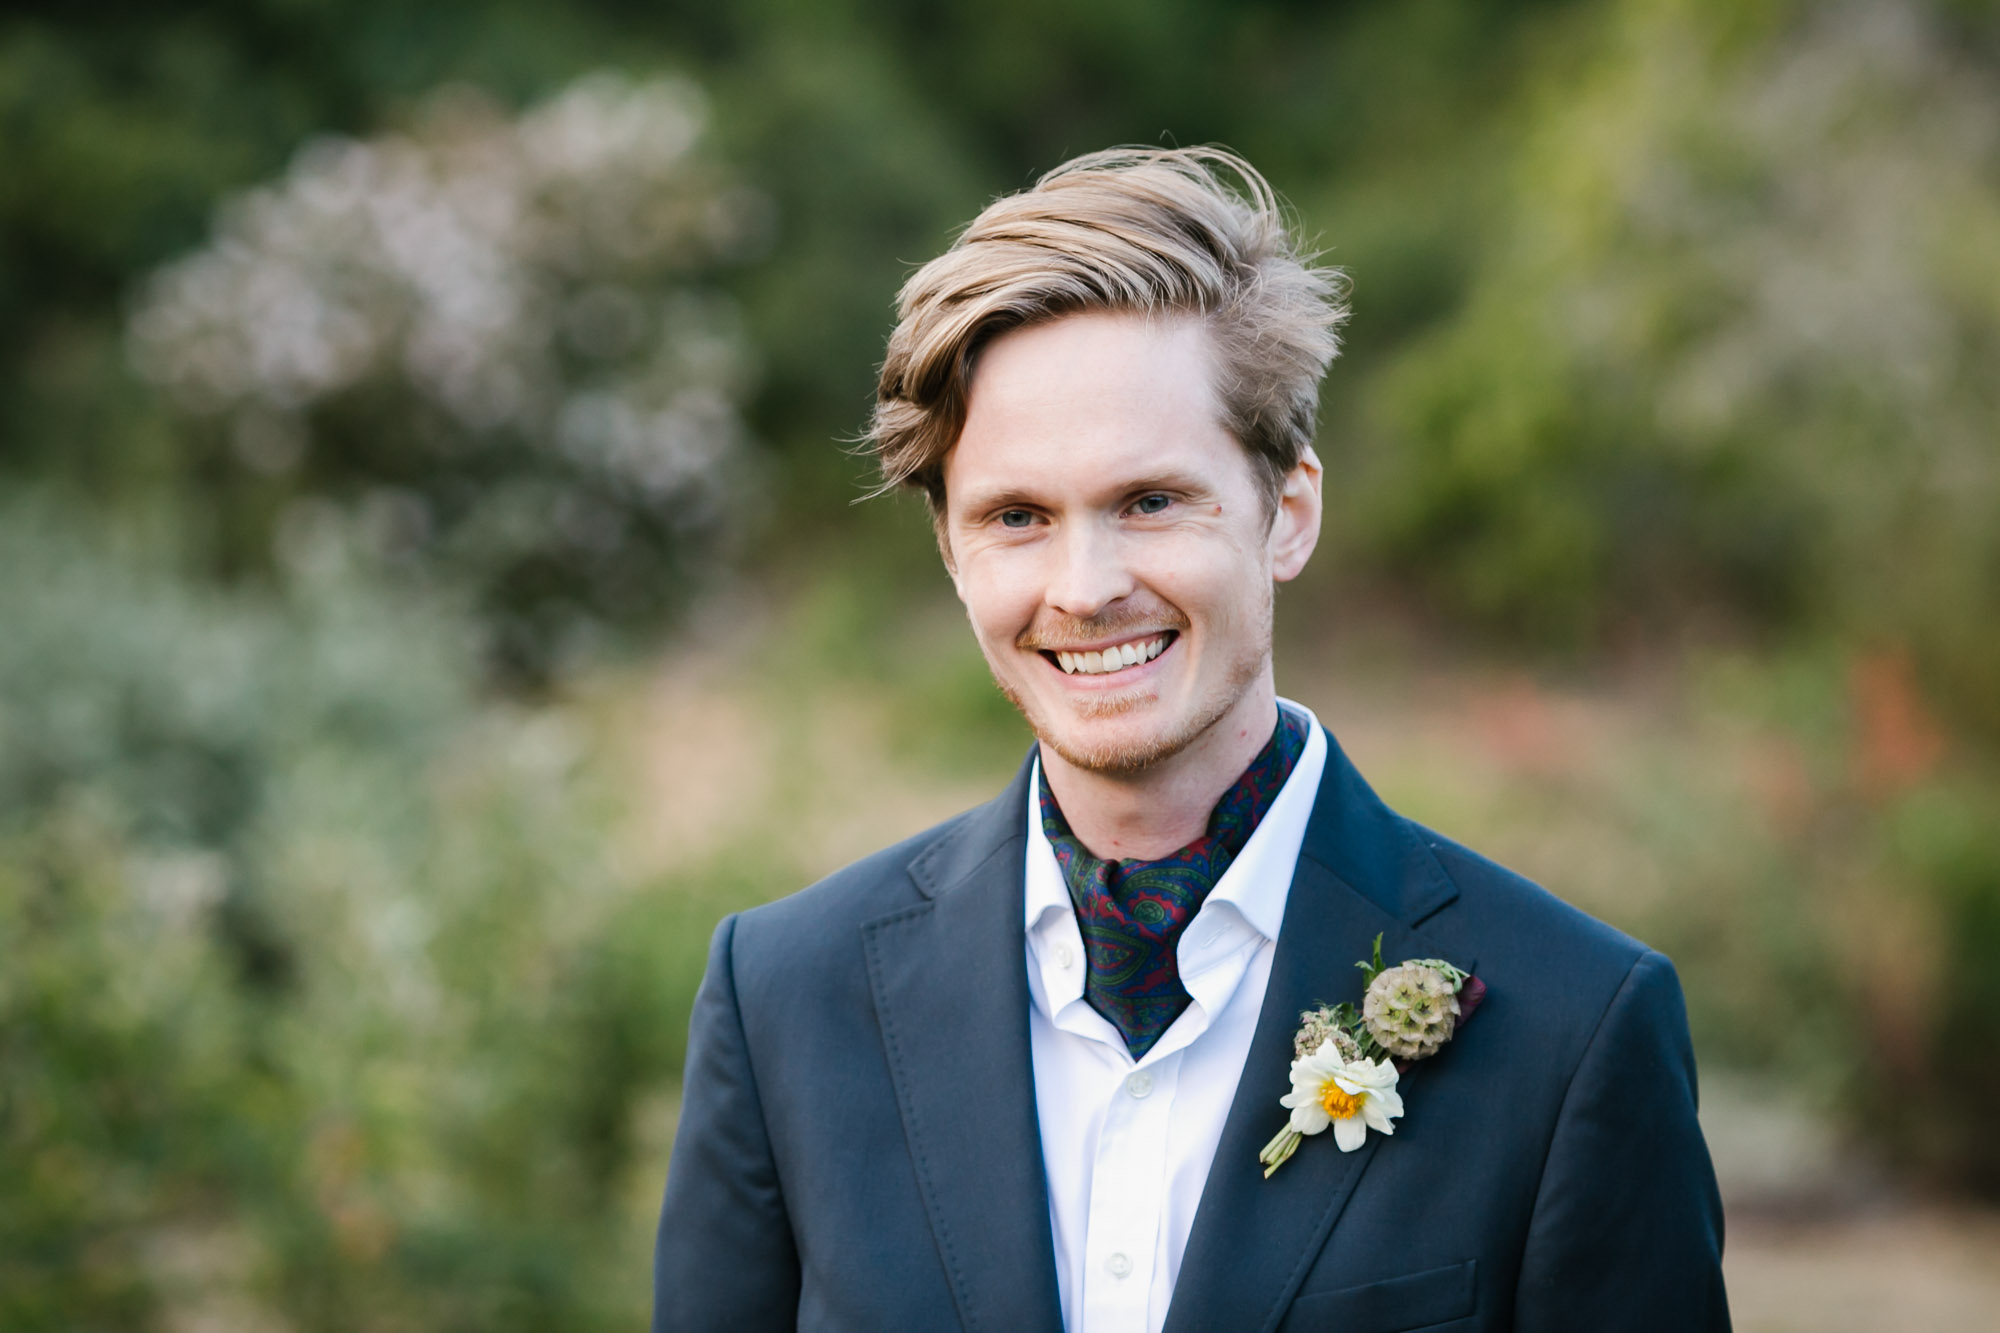 Swedish groom with blue suit and paisley ascot smiles on his wedding day